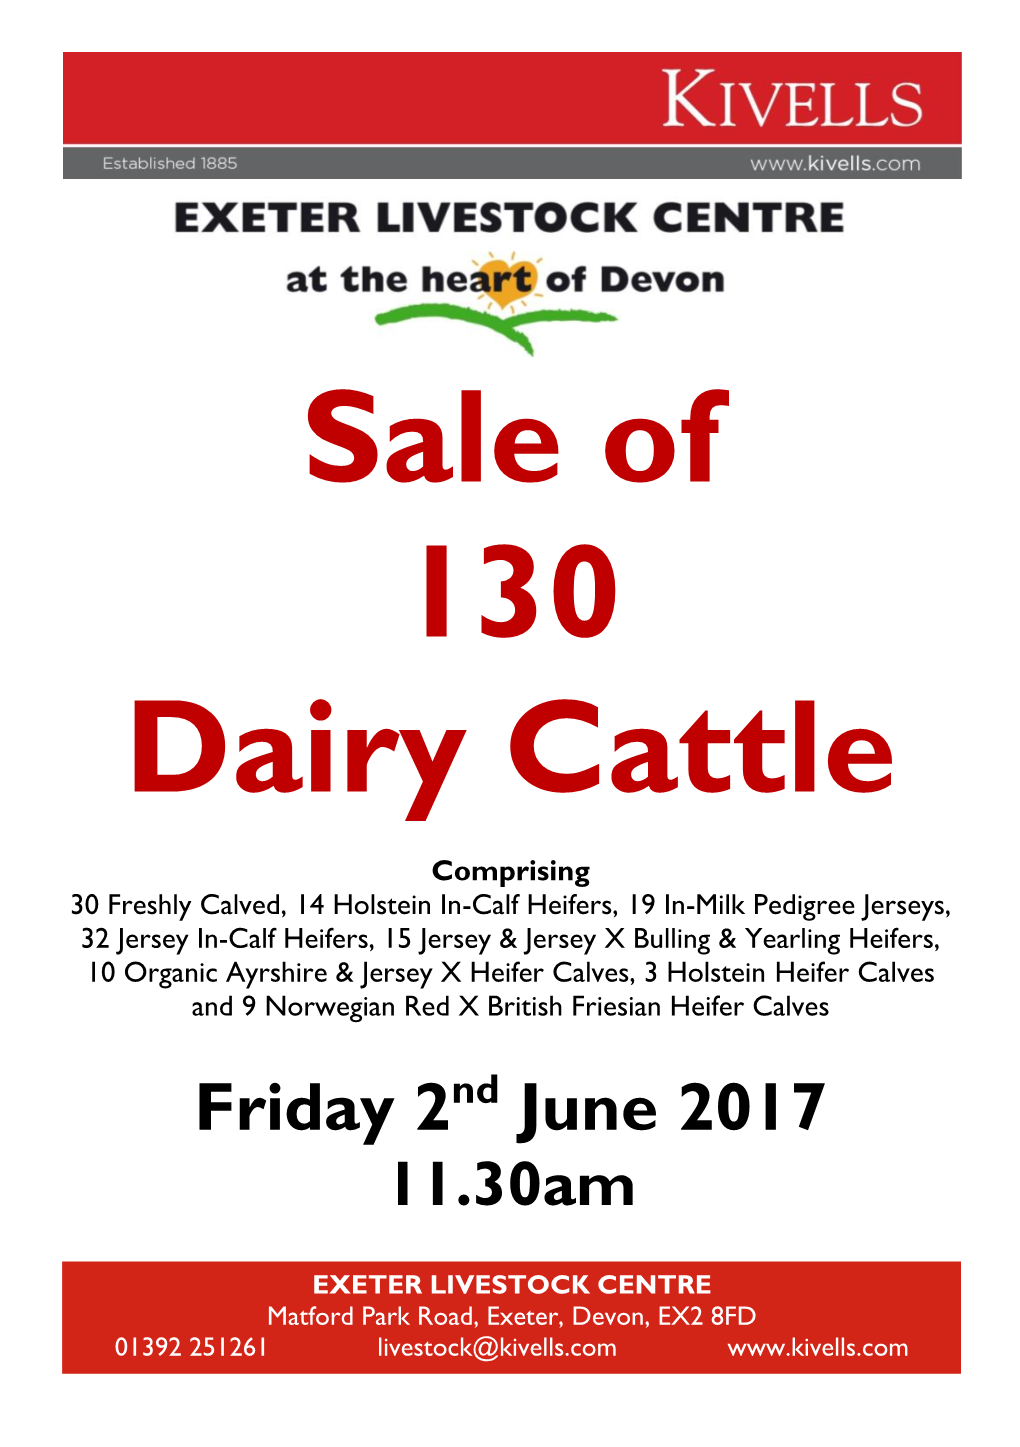 Sale of 130 Dairy Cattle